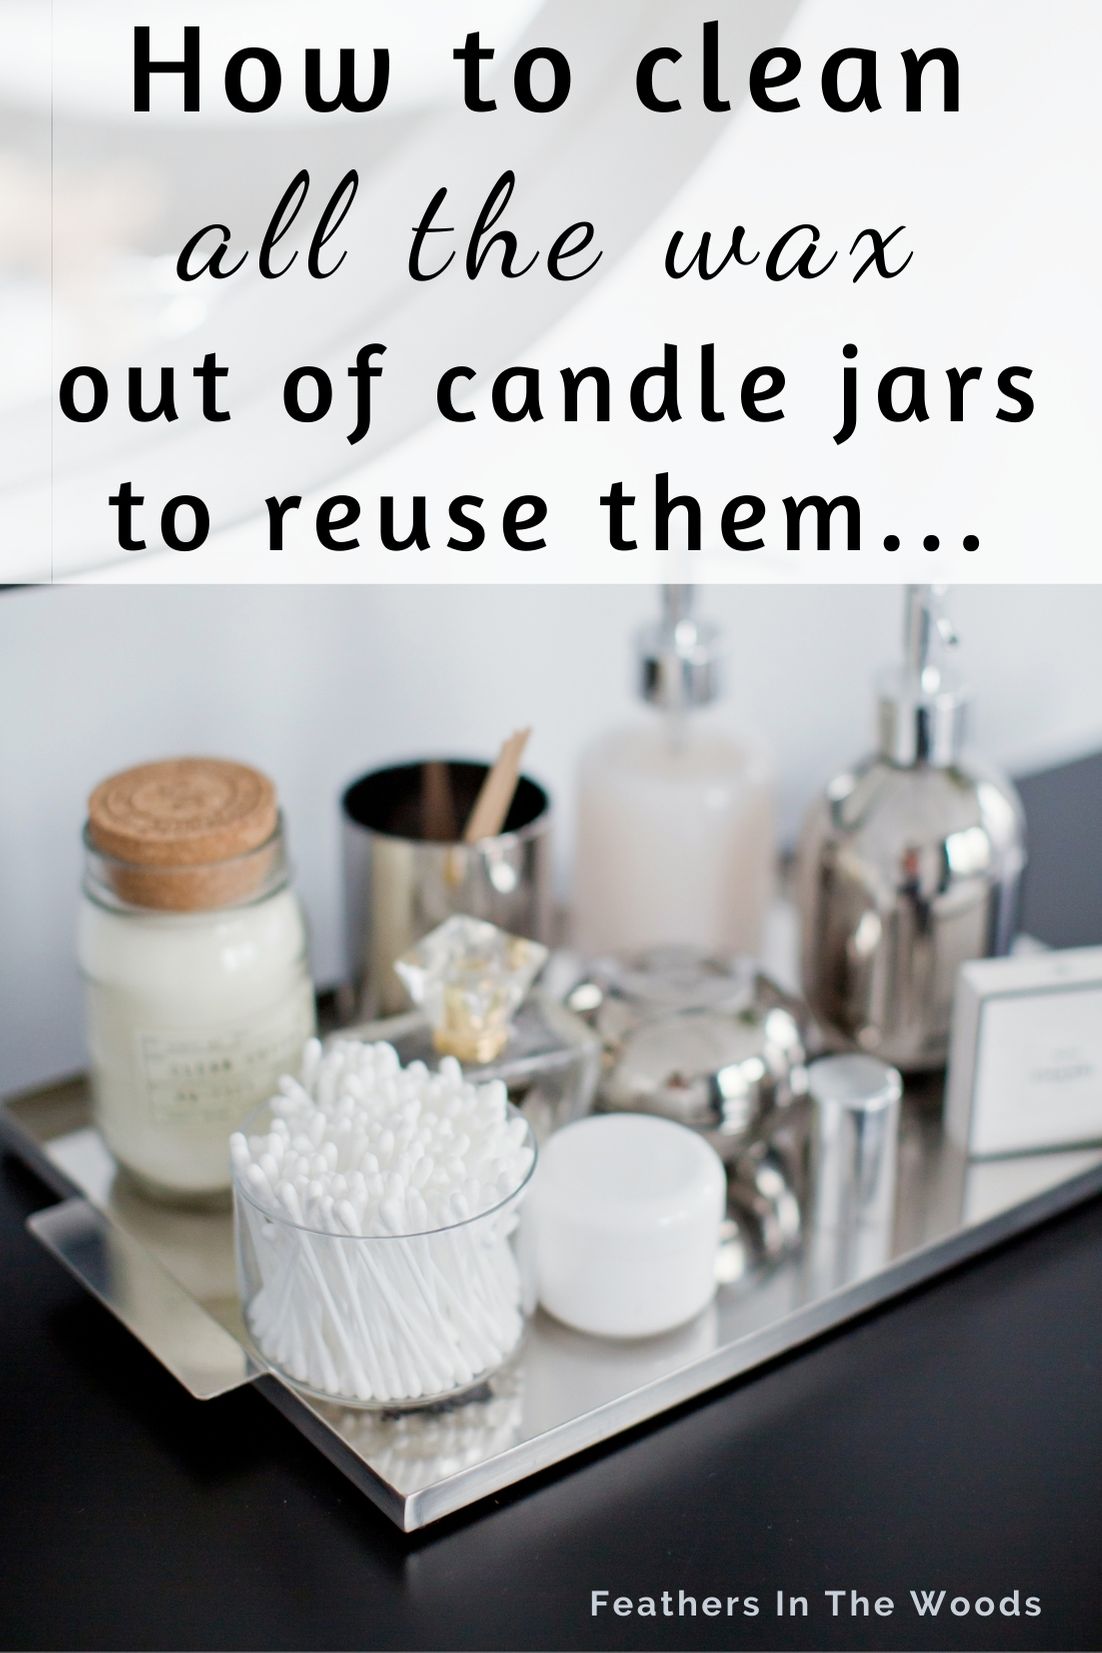 How to clean candle jars (the easy way) - Feathers in the woods